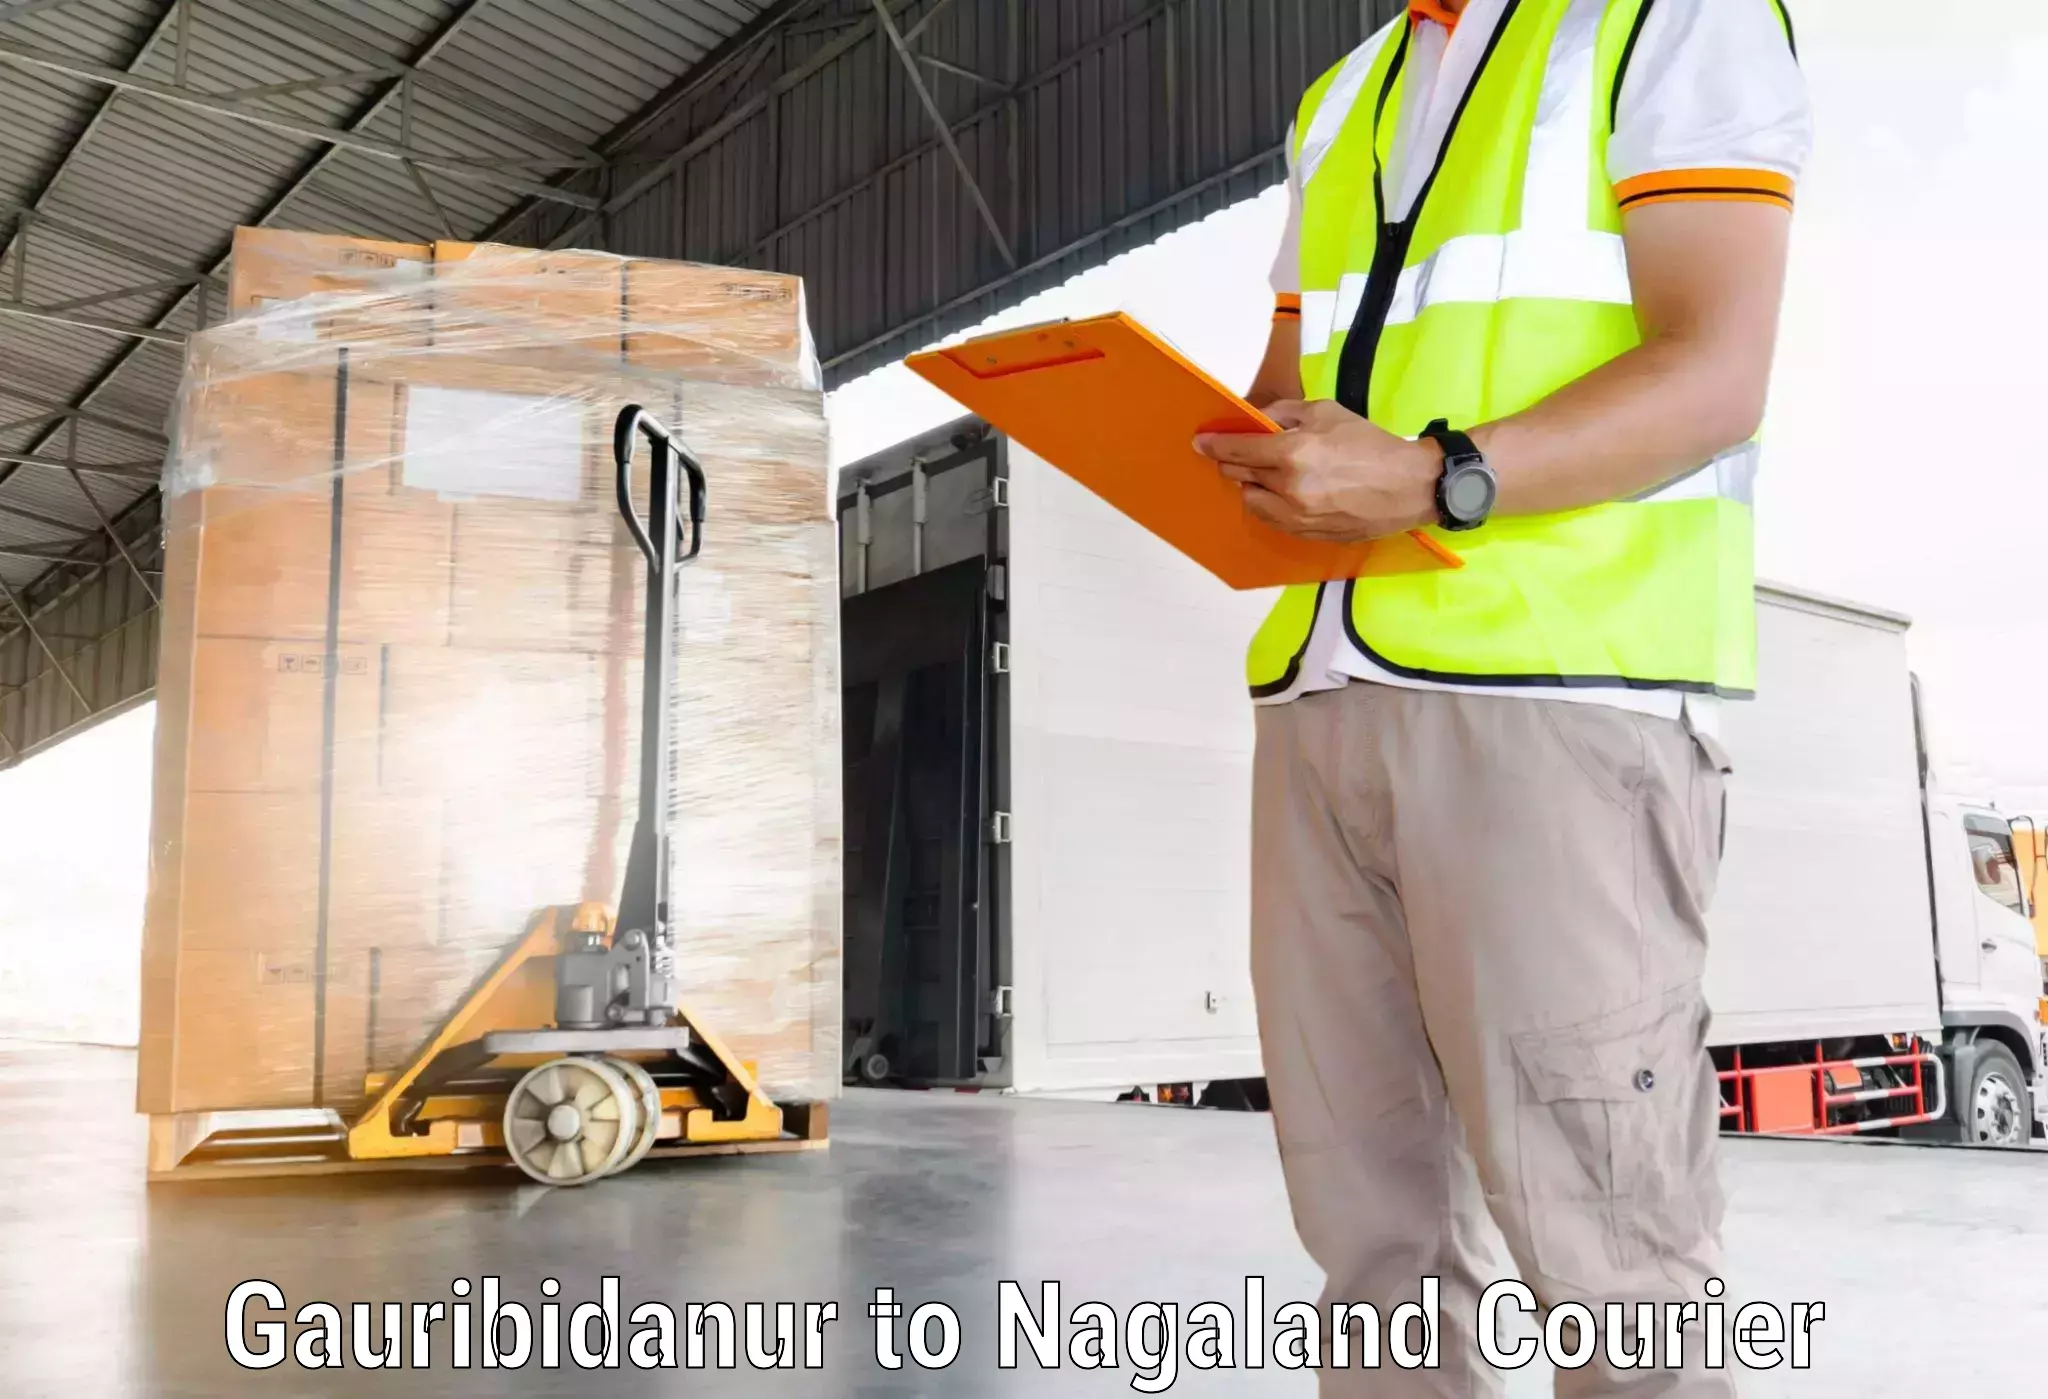 Cargo delivery service Gauribidanur to Longleng